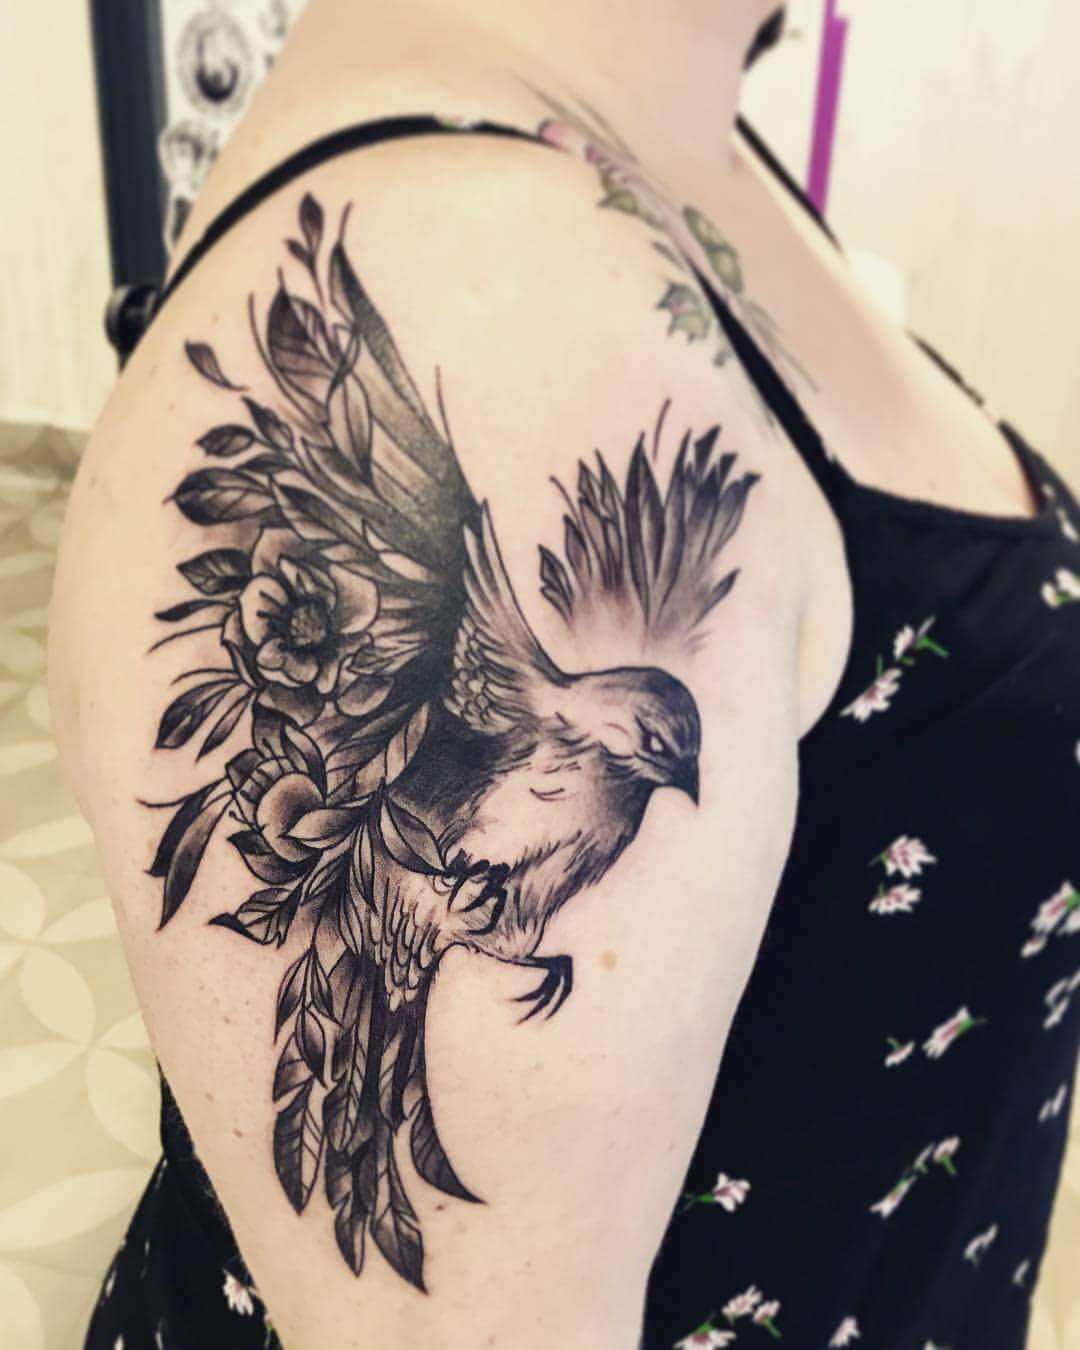 55 Cute And Artistic Bird Tattoo Designs You Want To Try Next intended for dimensions 1080 X 1350